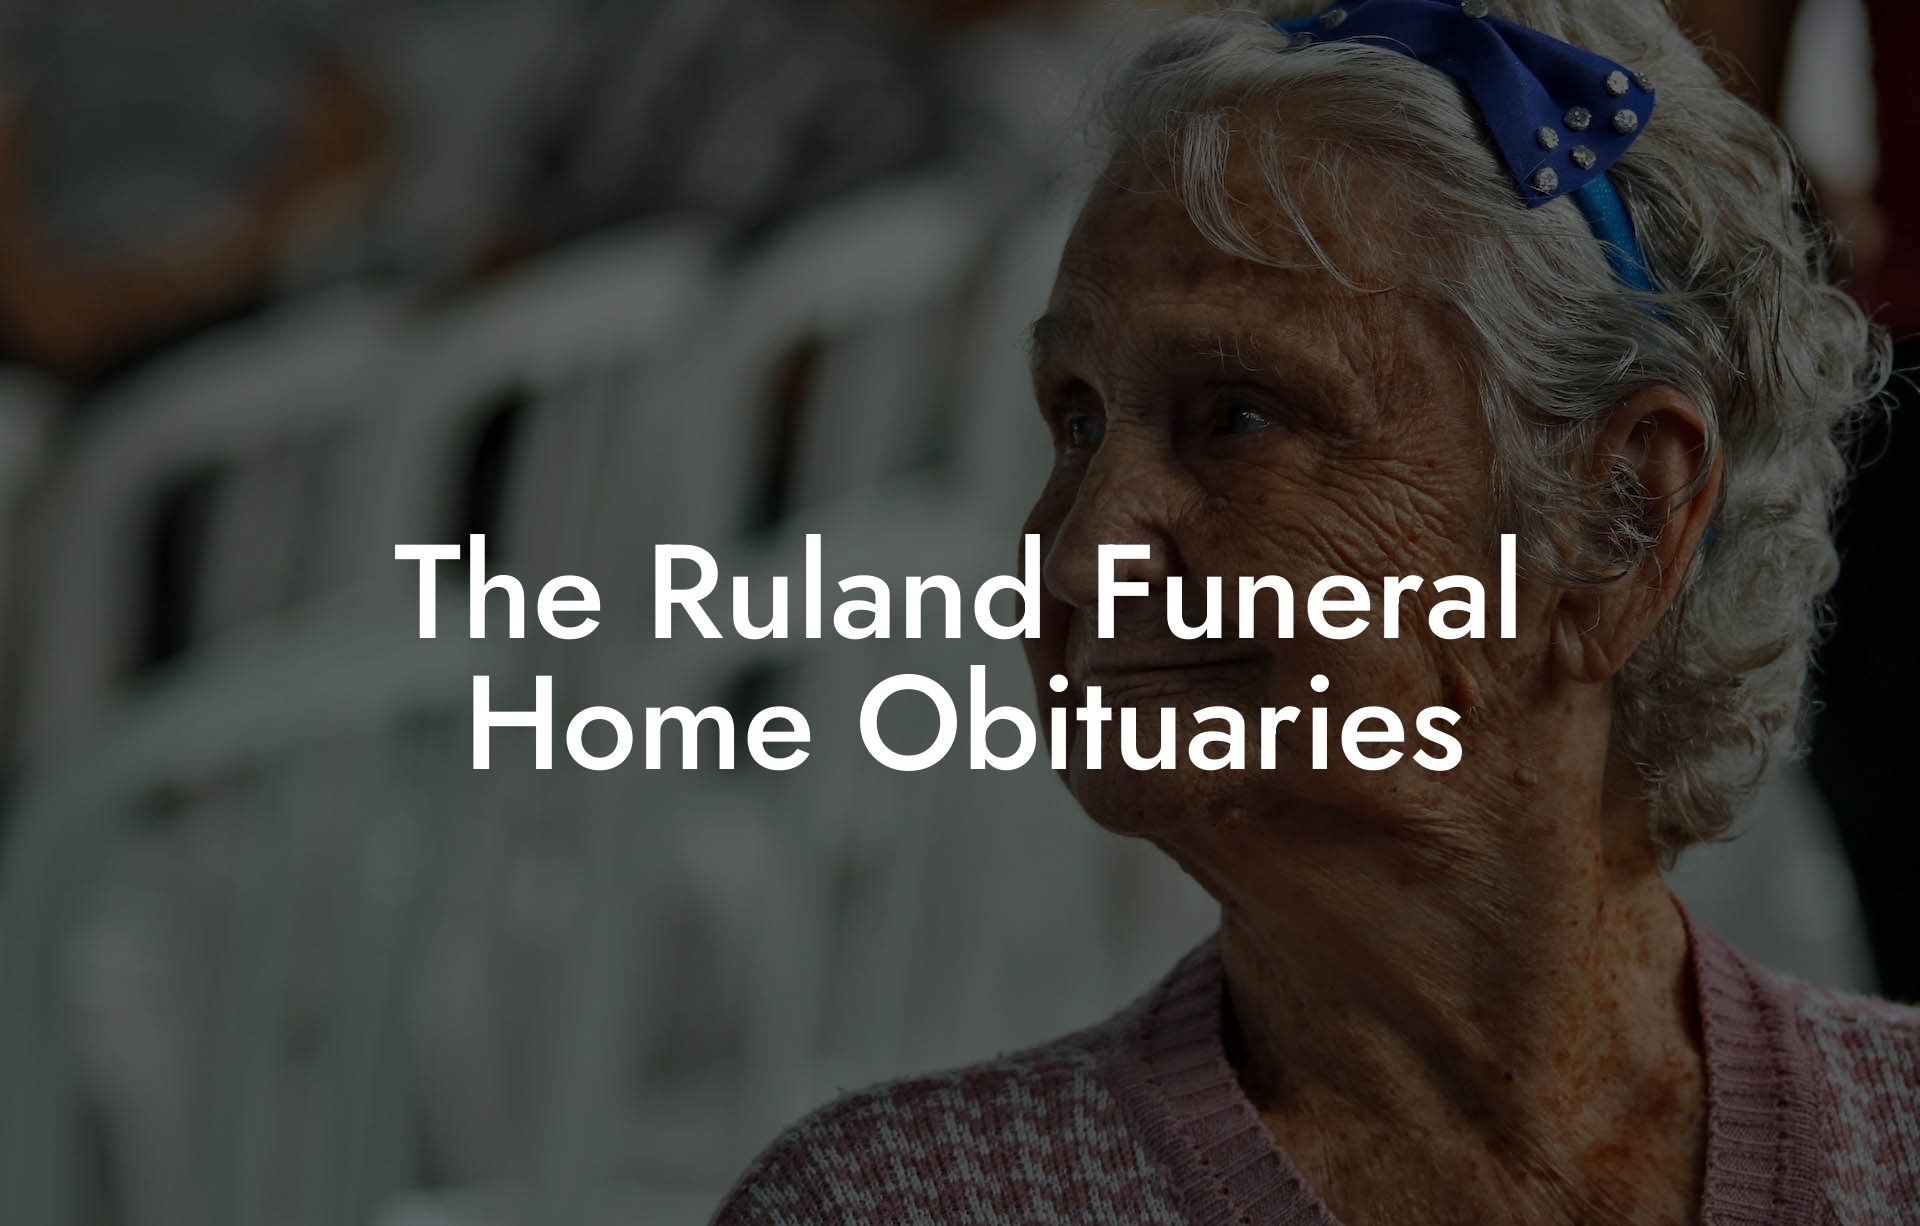 The Ruland Funeral Home Obituaries